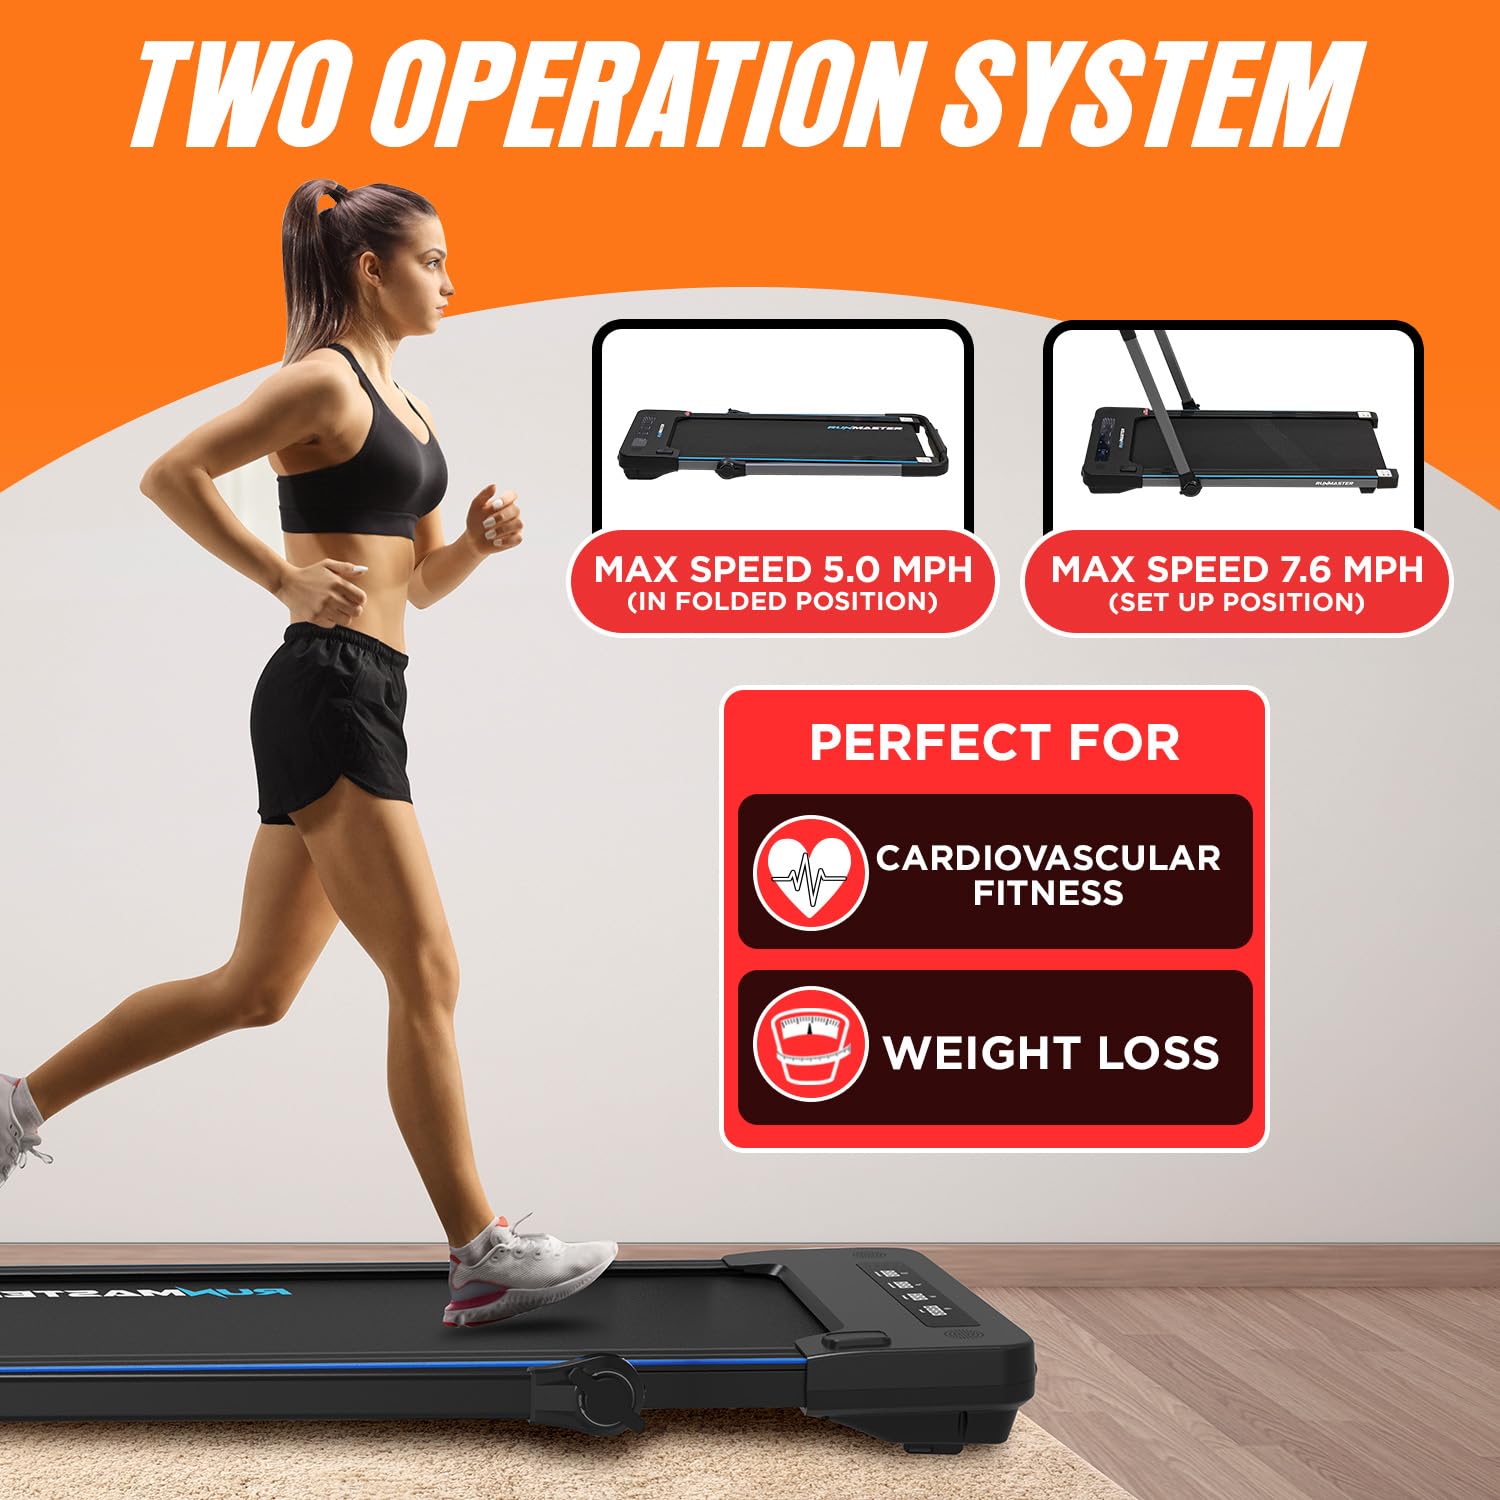 RunMaster 2 in 1 Folding Treadmill, 2.5HP Under Desk Electric Treadmill for Home, Office, Easy Installation, Remote Control, Walking Pad, Large Belt for Walking, Jogging, 12 Exercise Programs